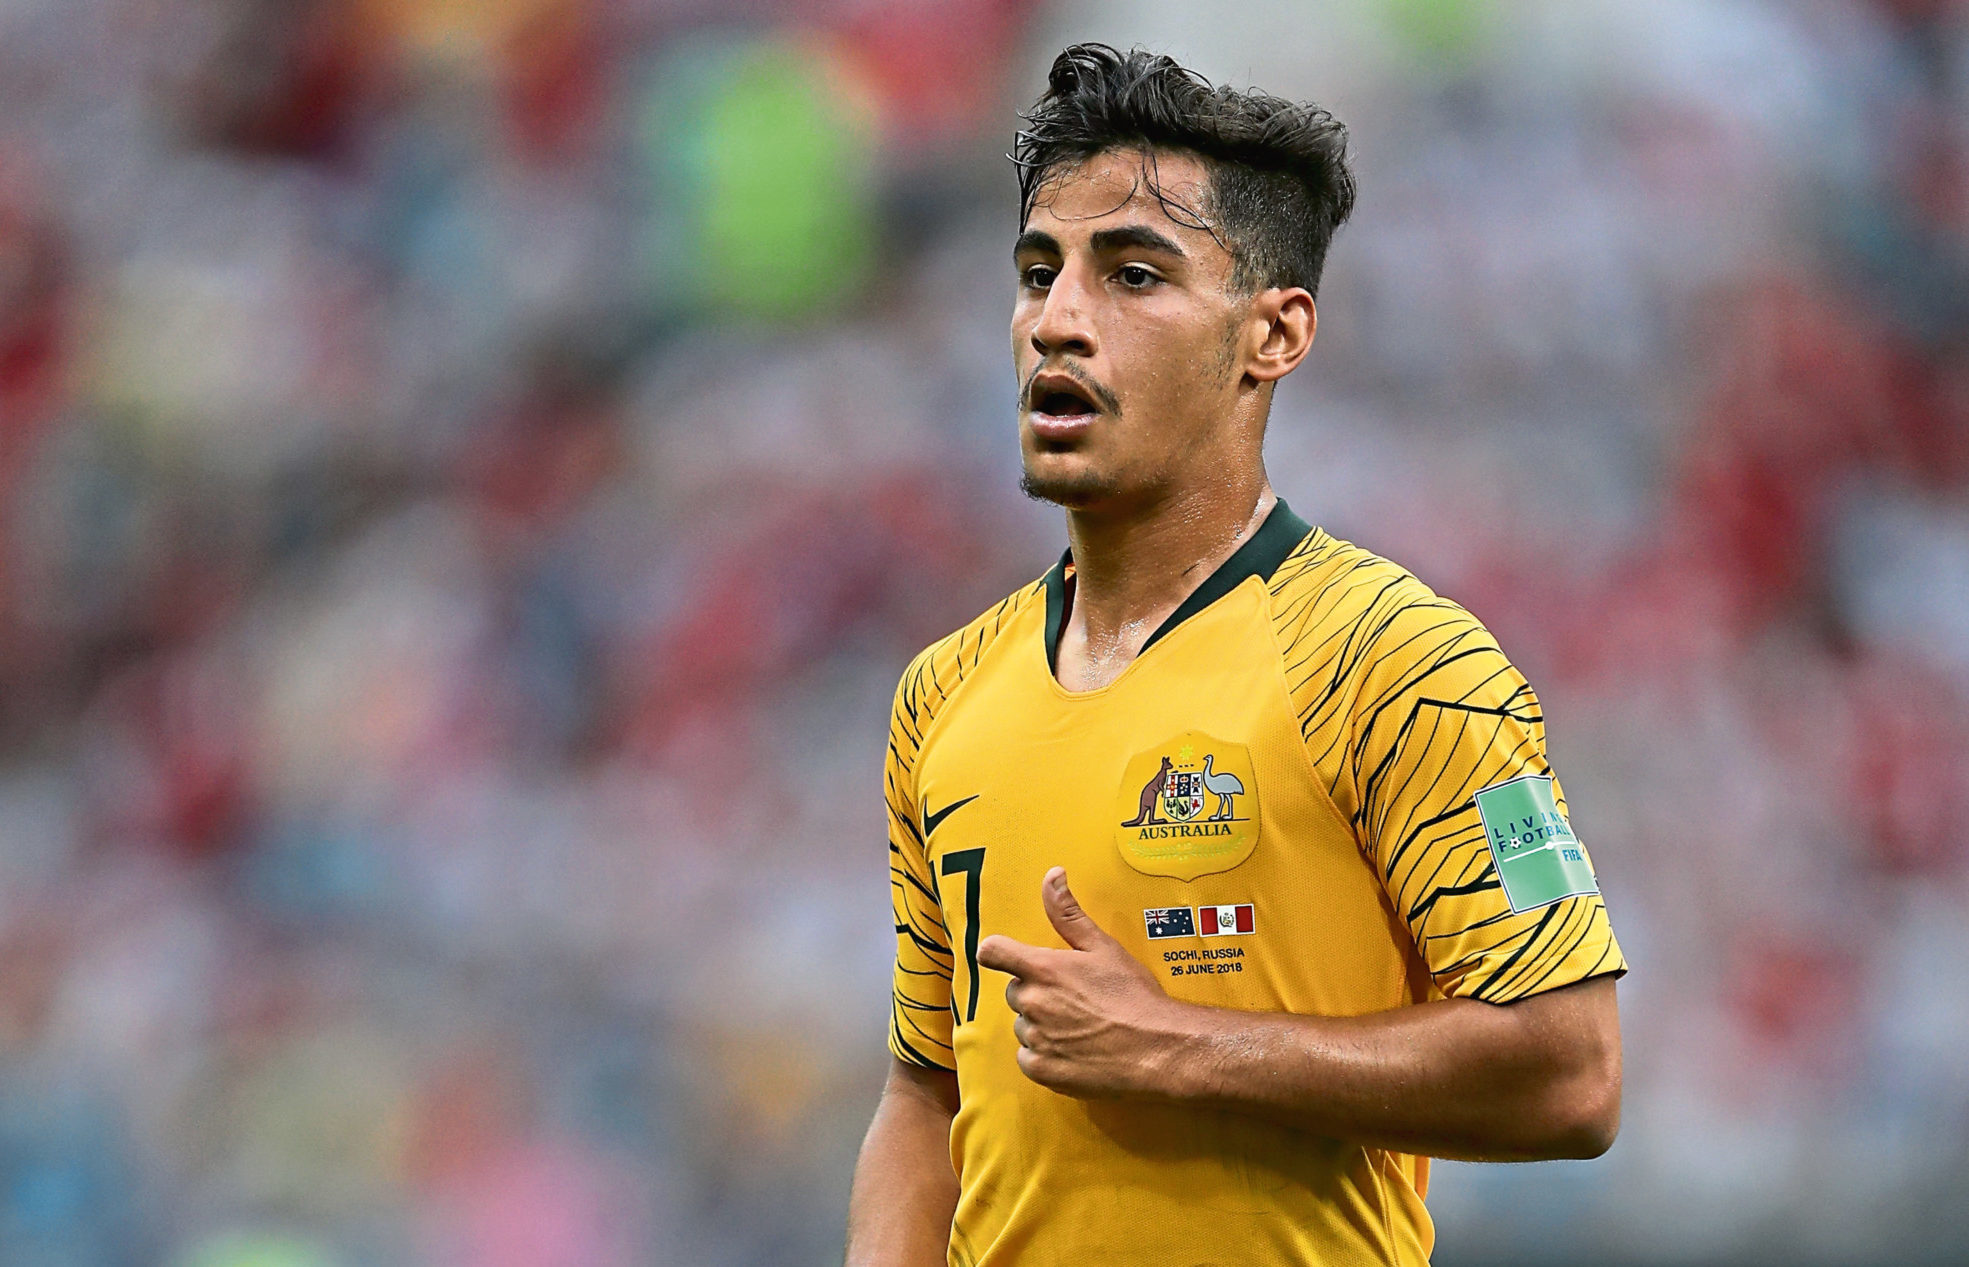 Daniel Arzani in action at the World Cup (Getty Images)